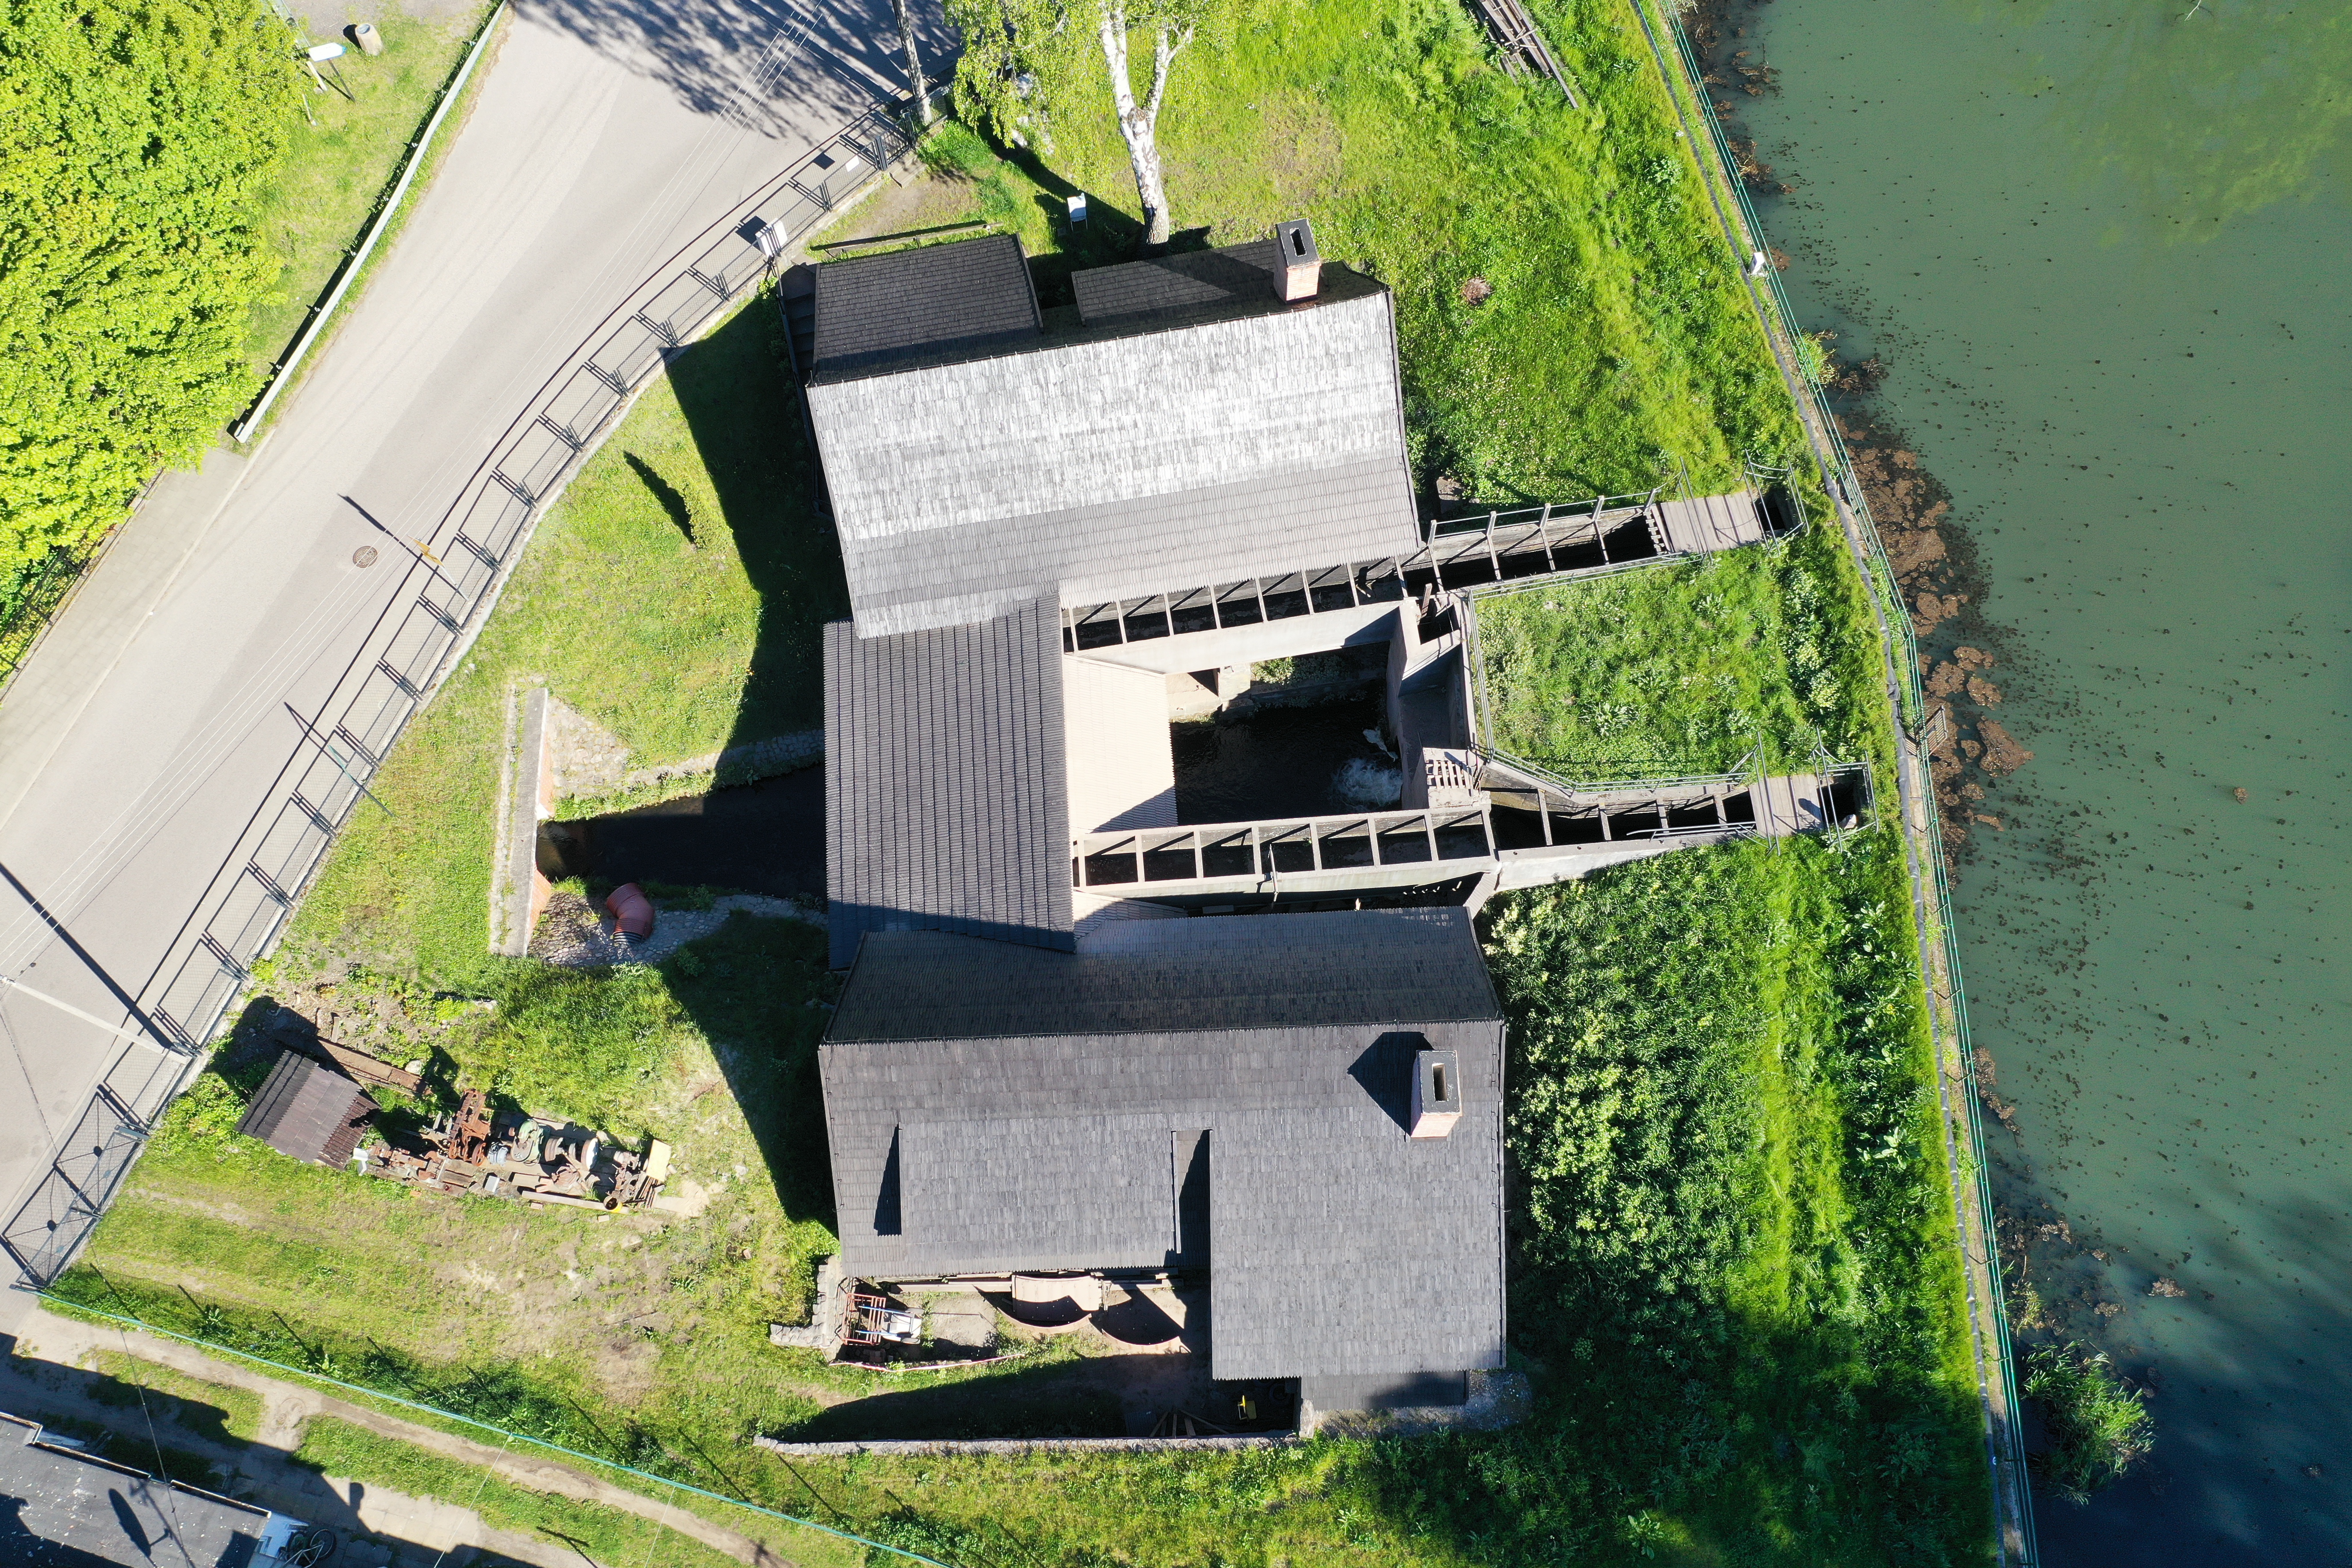 Hammerforge seen from bird's eye view. Wooden building, surrounded by grass field and river.